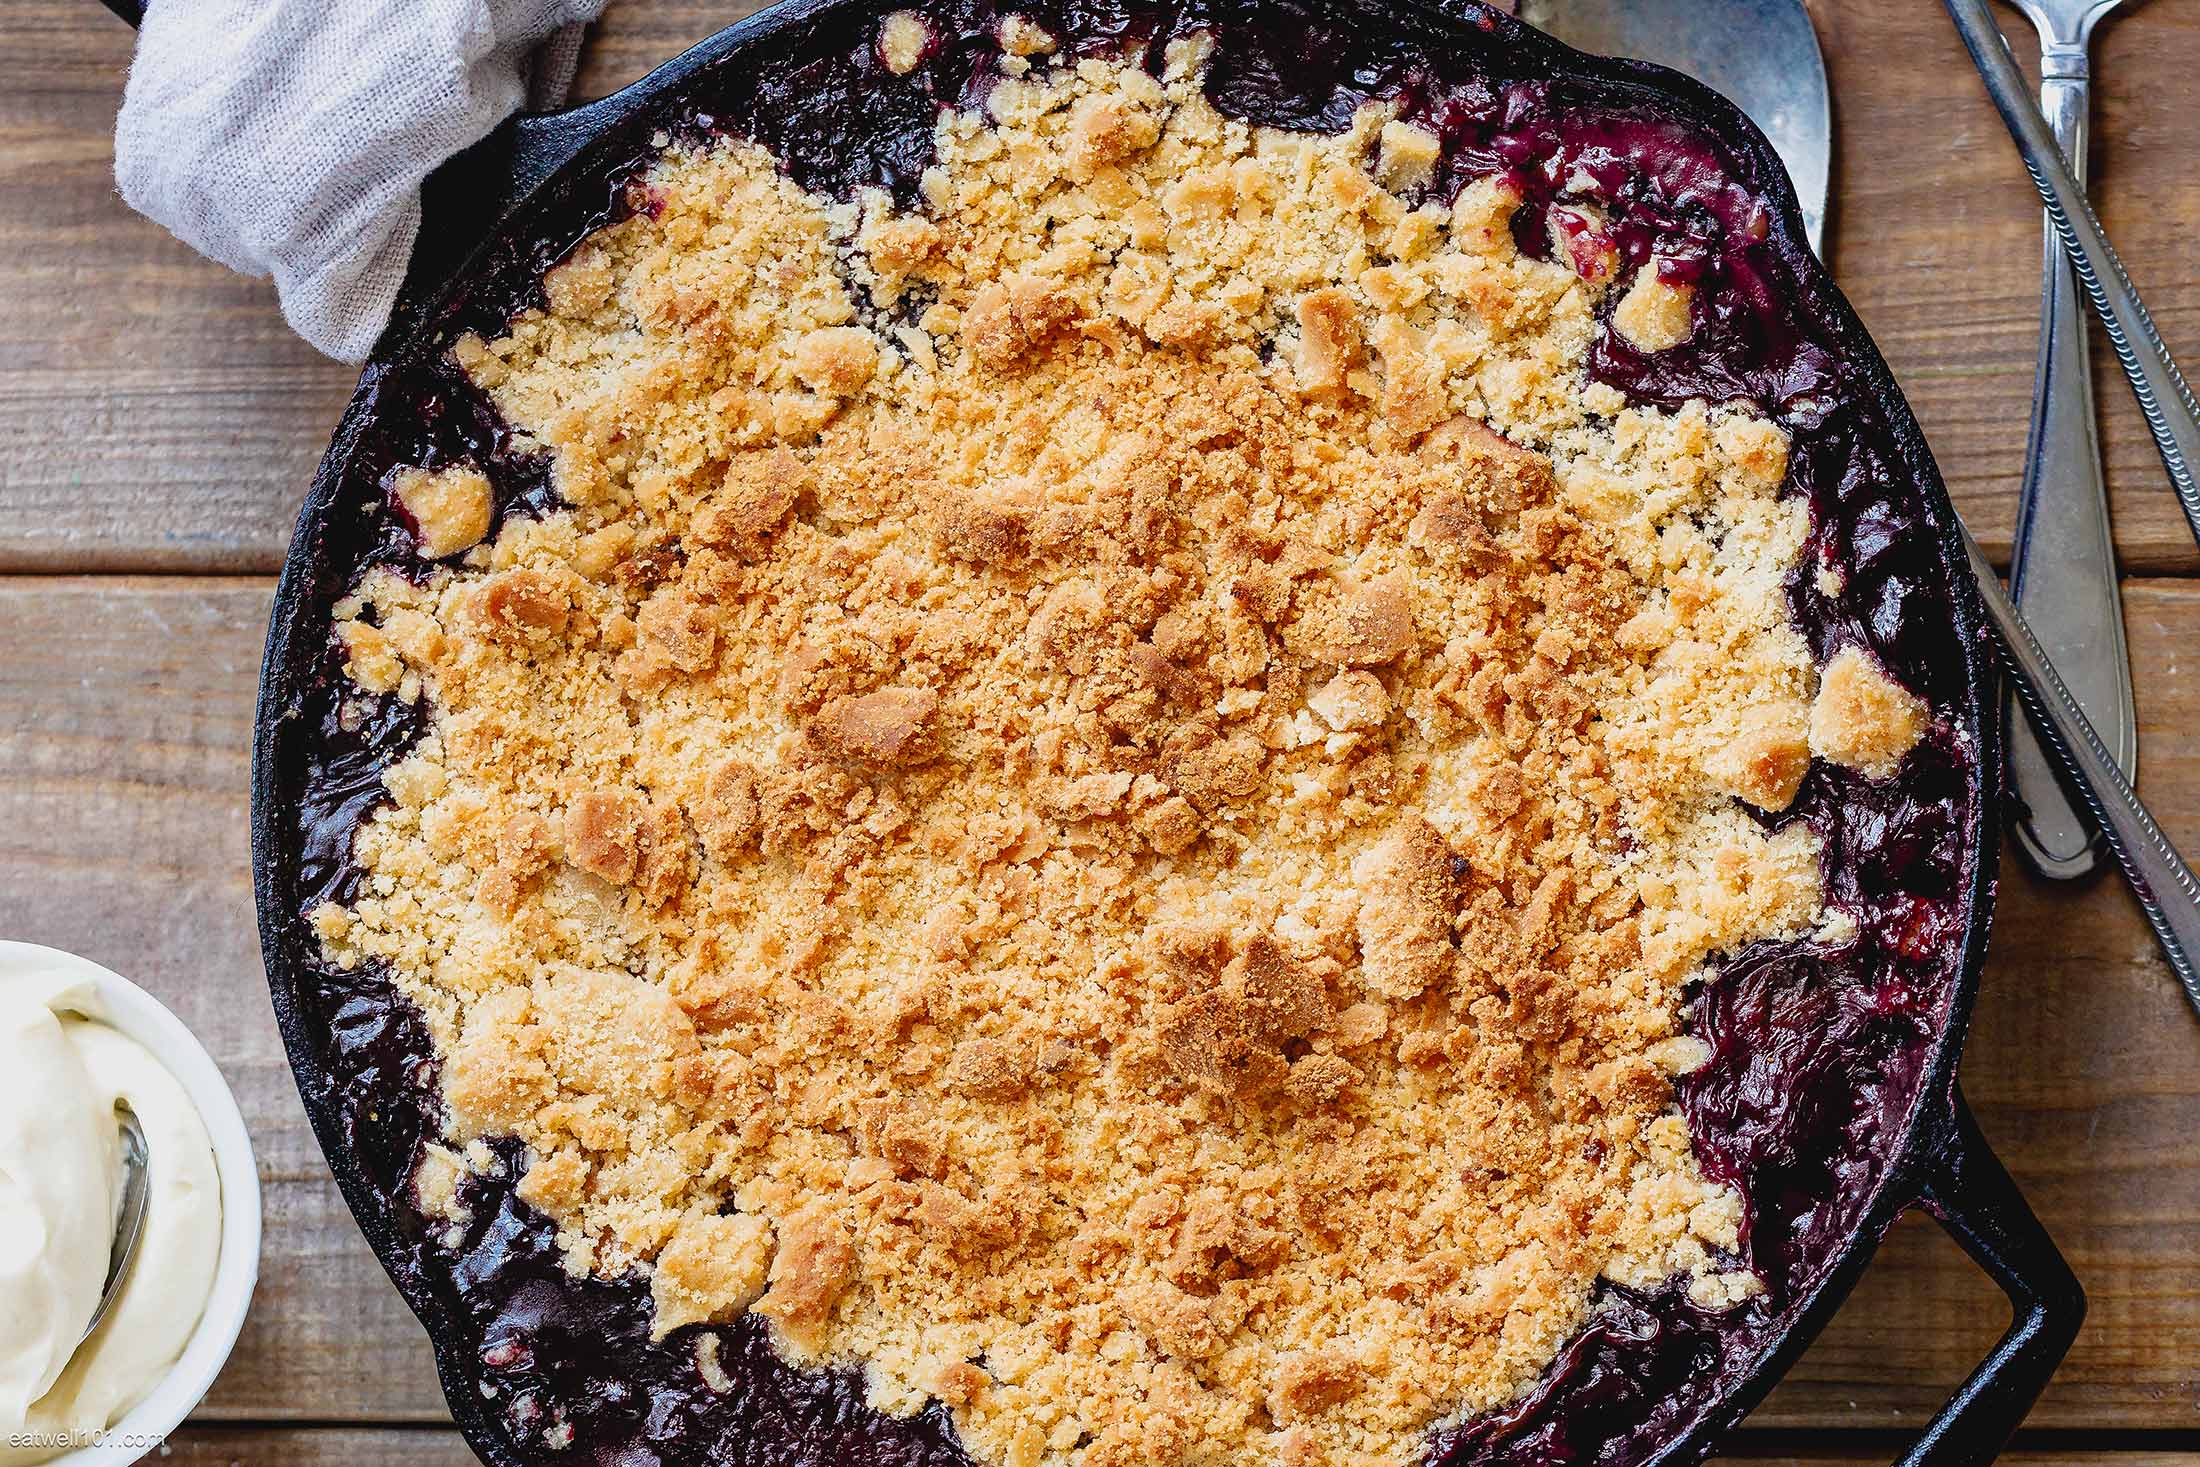 Triple Berries Skillet Cobbler with Layered Cheesecake Topping